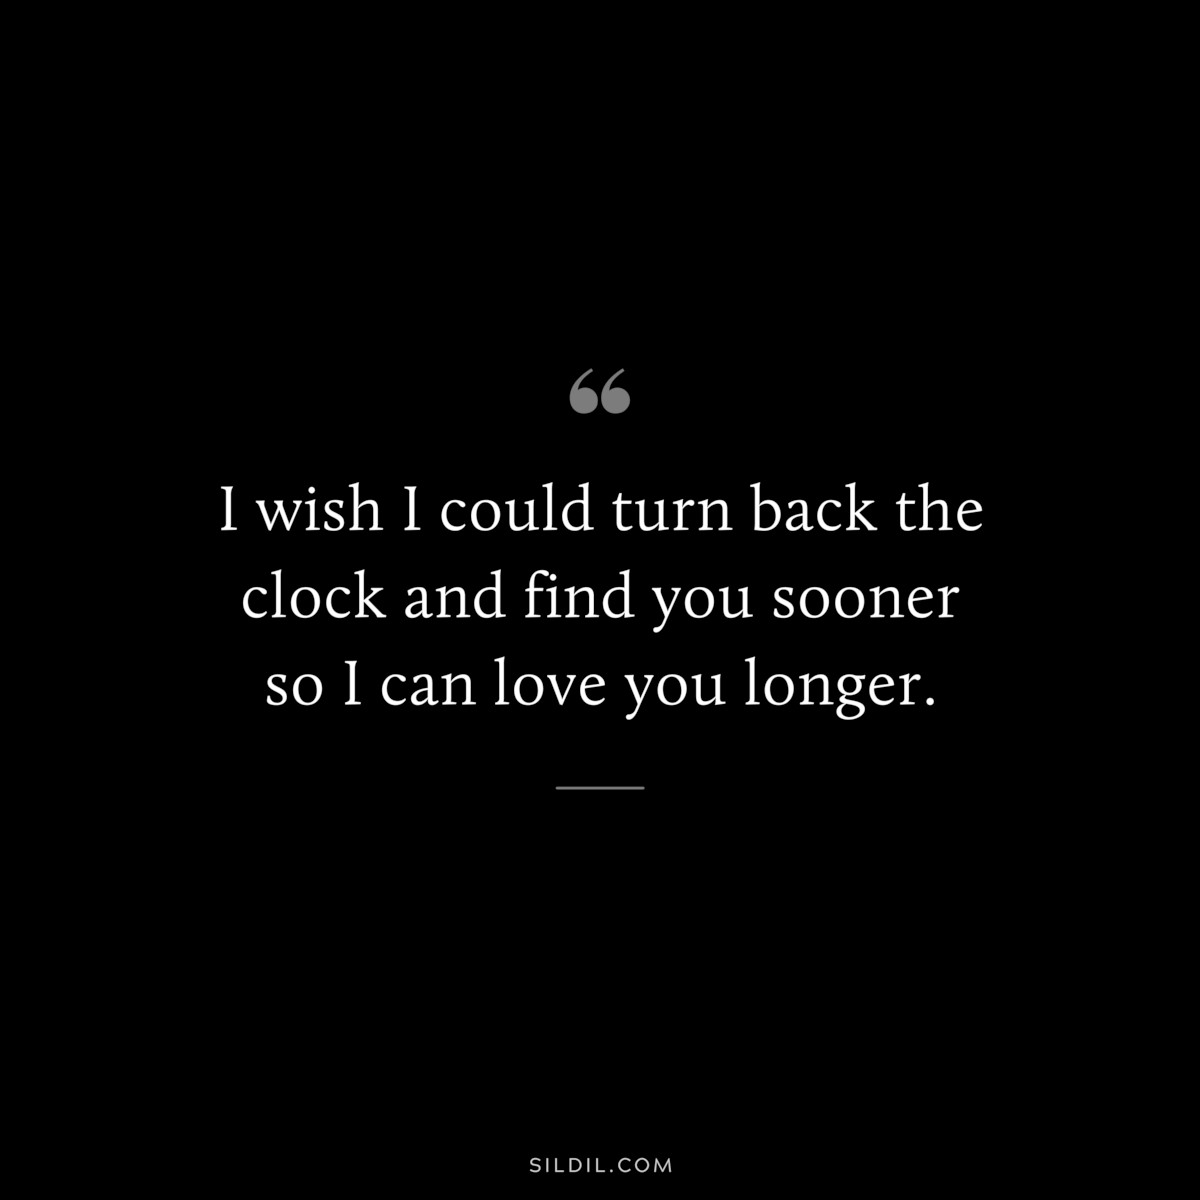 I wish I could turn back the clock and find you sooner so I can love you longer.